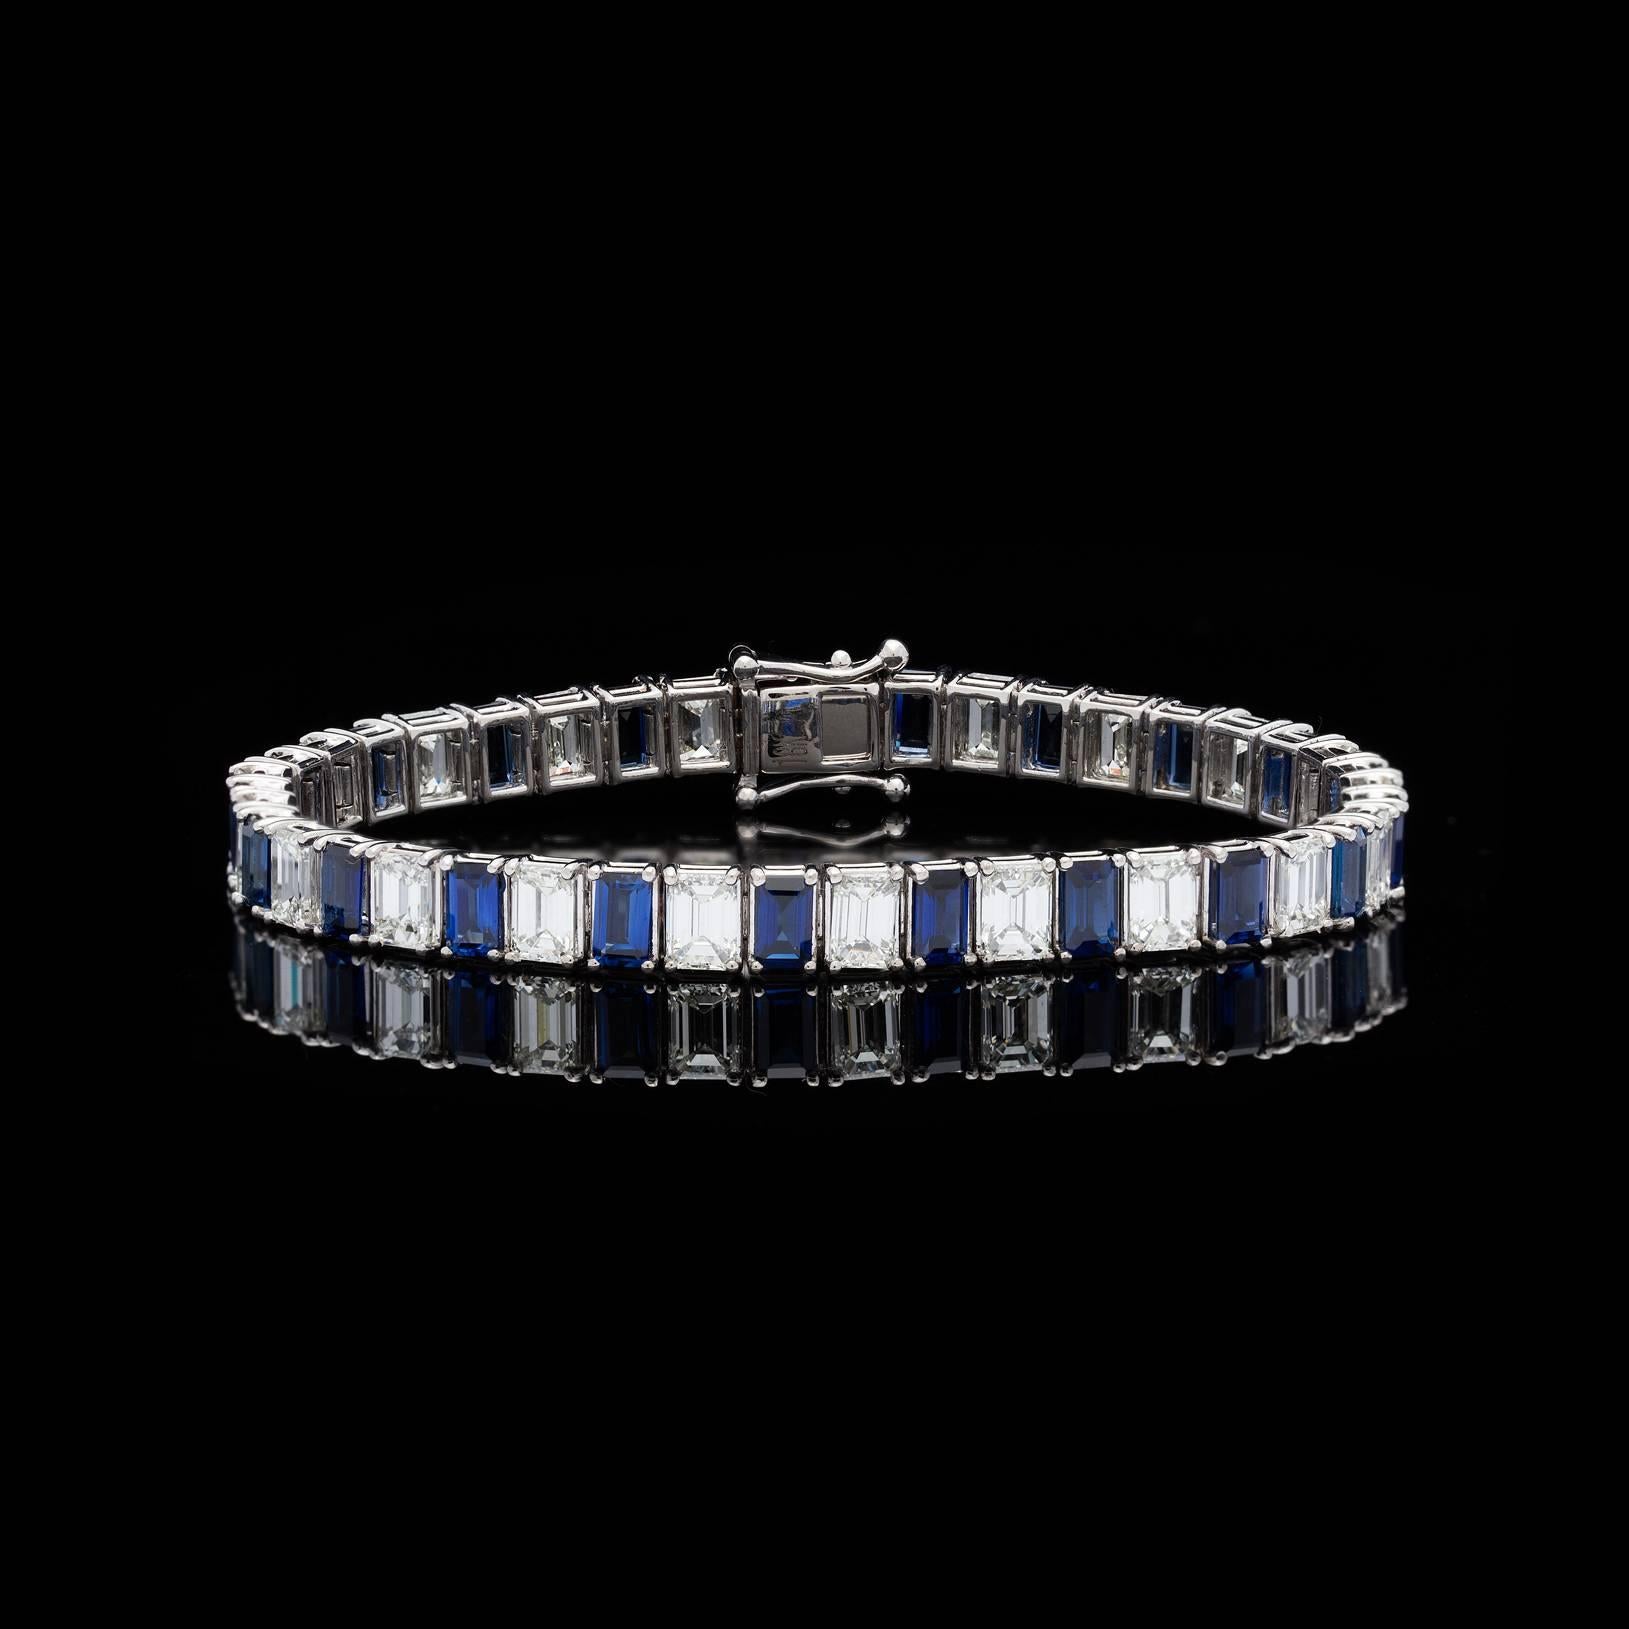 Spectacular alternating rectangle sapphire and emerald cut diamond bracelet set in 18k white gold. The bracelet includes 8.90 ct. tw.  VVS-VS/E-G quality diamonds and 7.60 ct. tw. fine blue sapphires. The bracelet measures 6mm wide and 6 3/4 inches